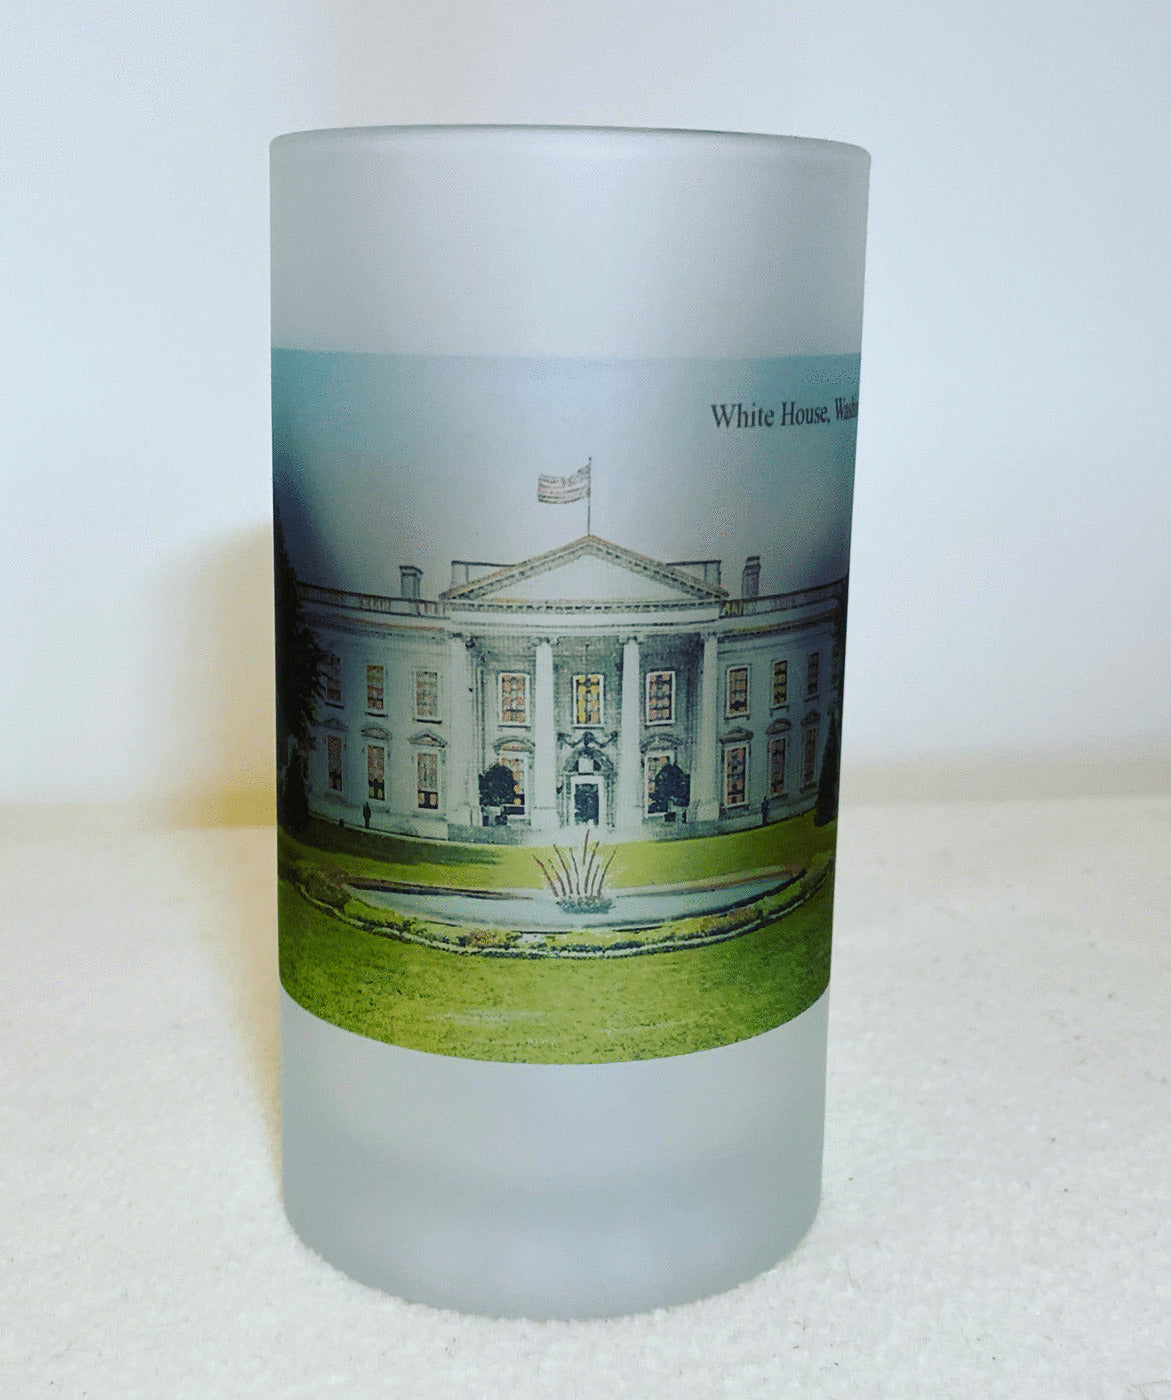 White House Image on Frosted Glass Beer Mug. Great gift